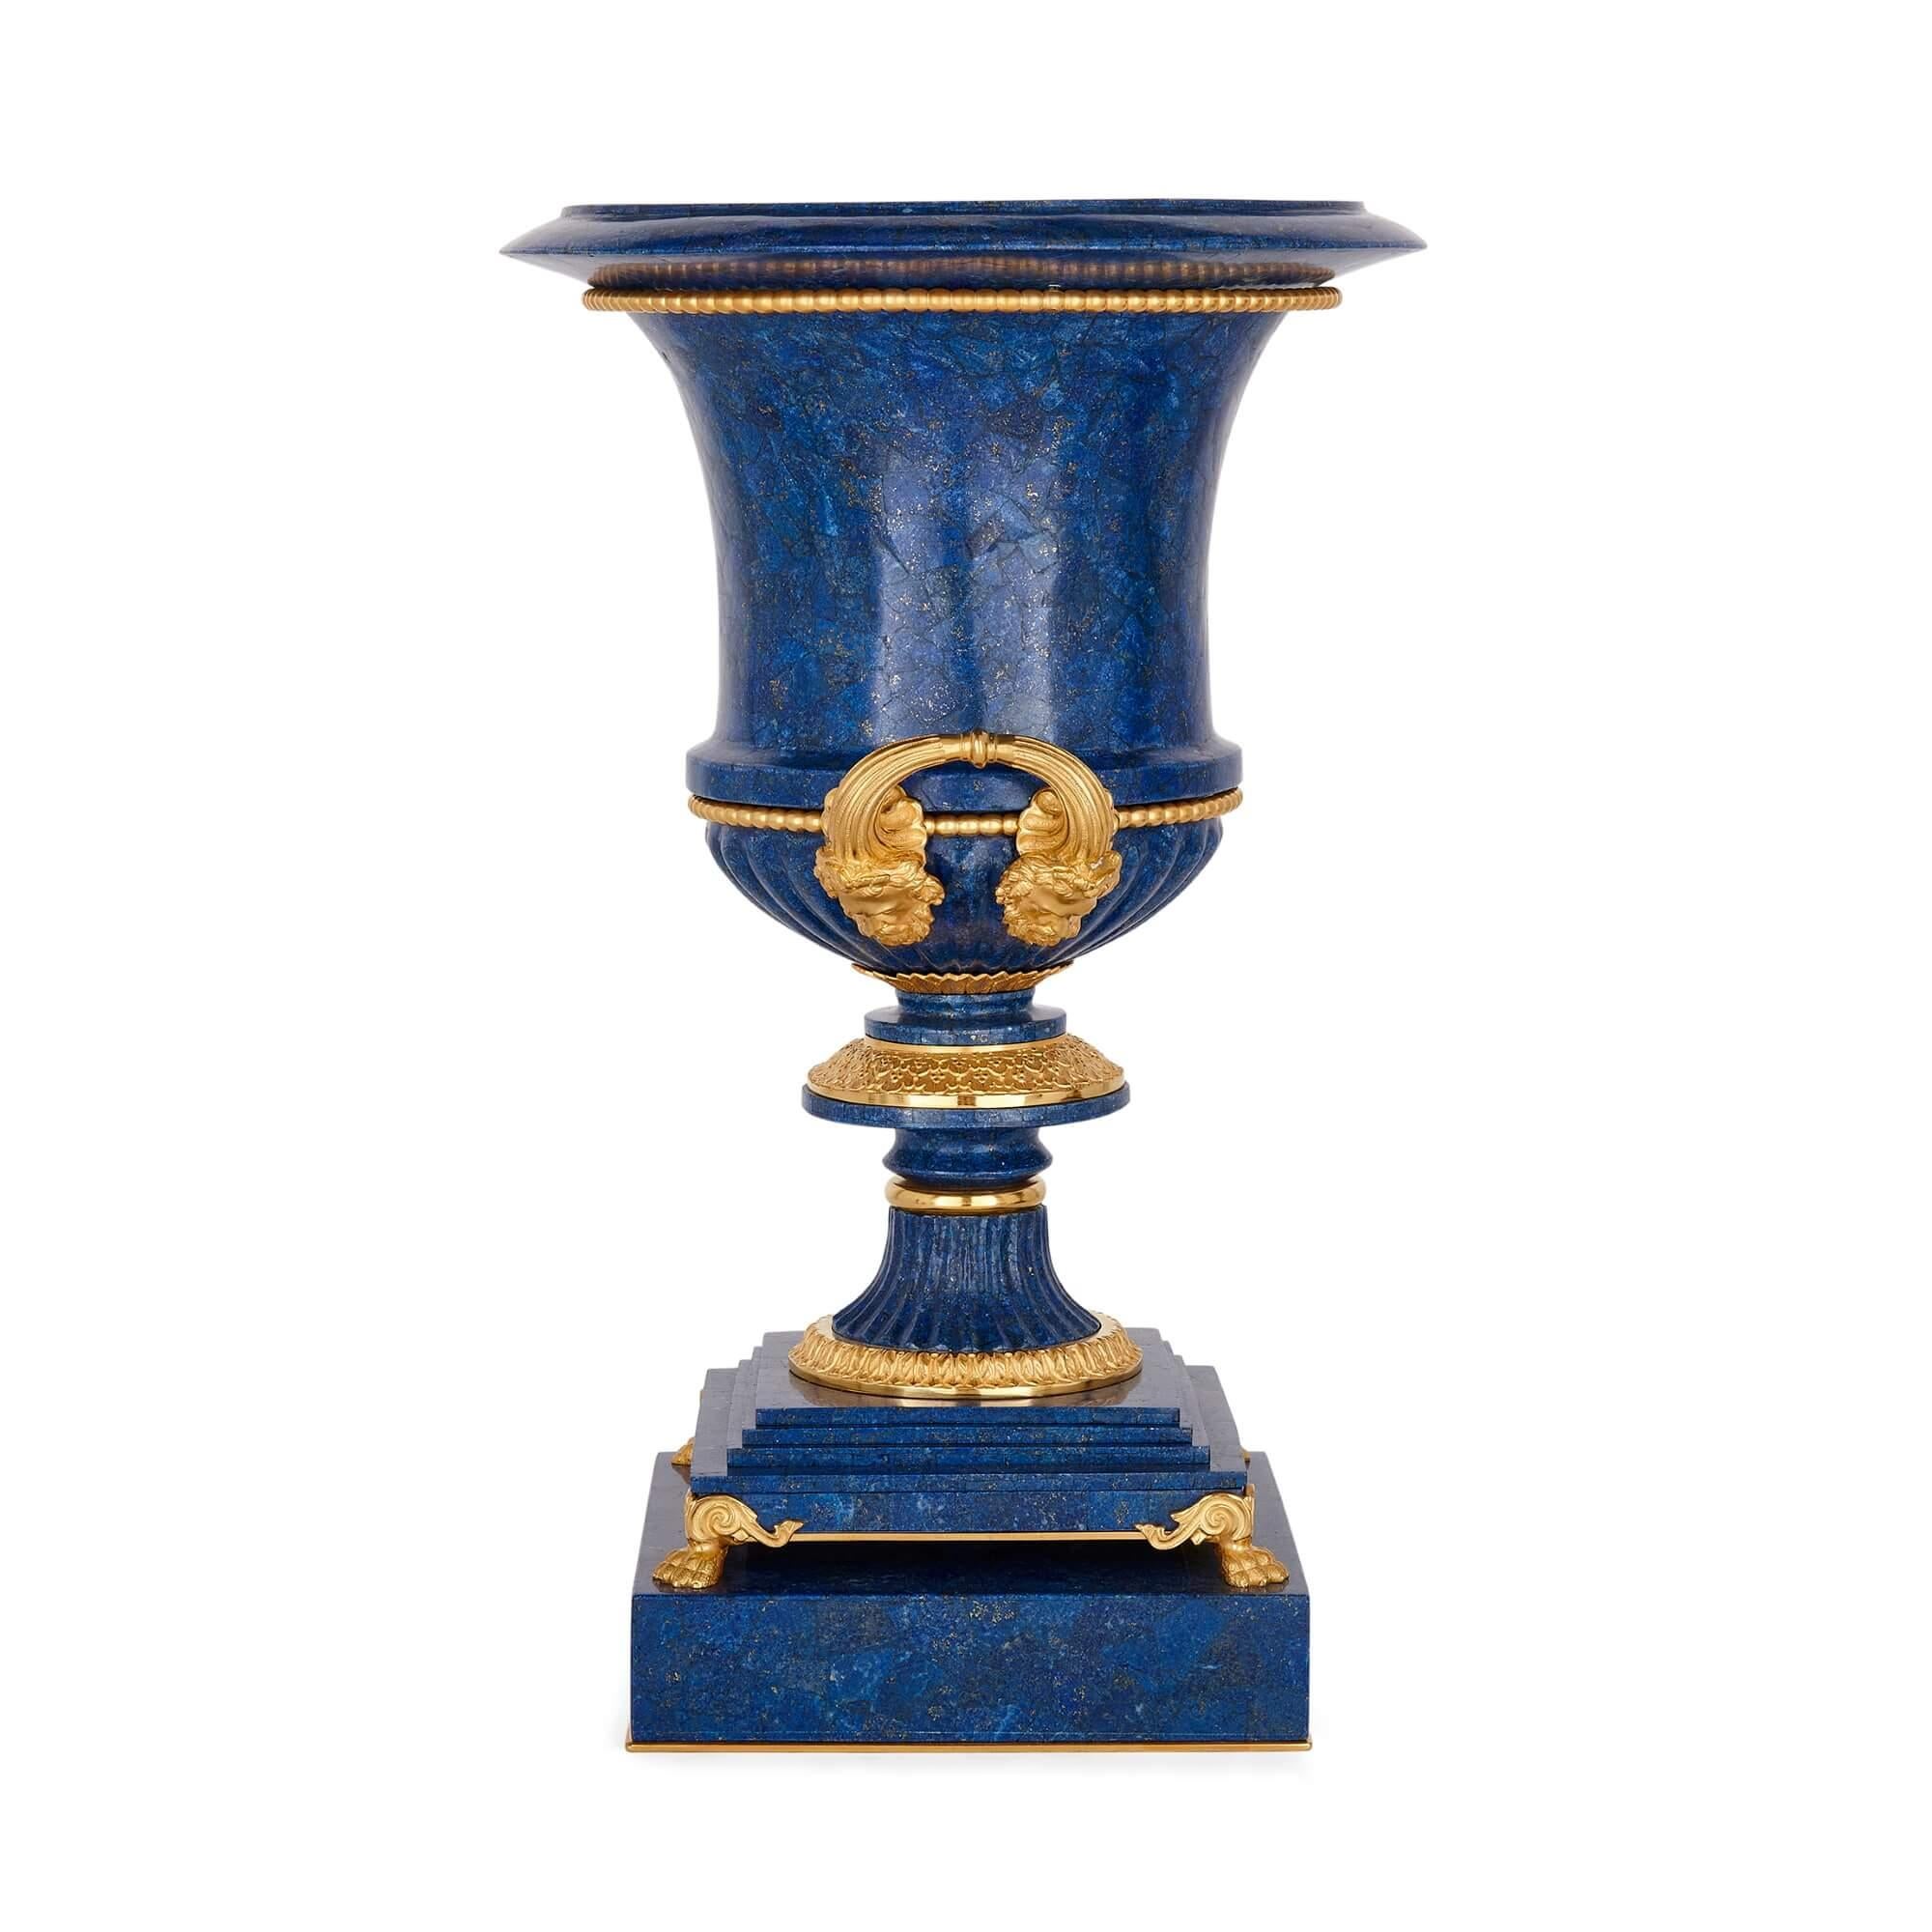 Neoclassical Pair of Lapis Lazuli and Ormolu Mounted 'Medici' Vases After Galberg For Sale